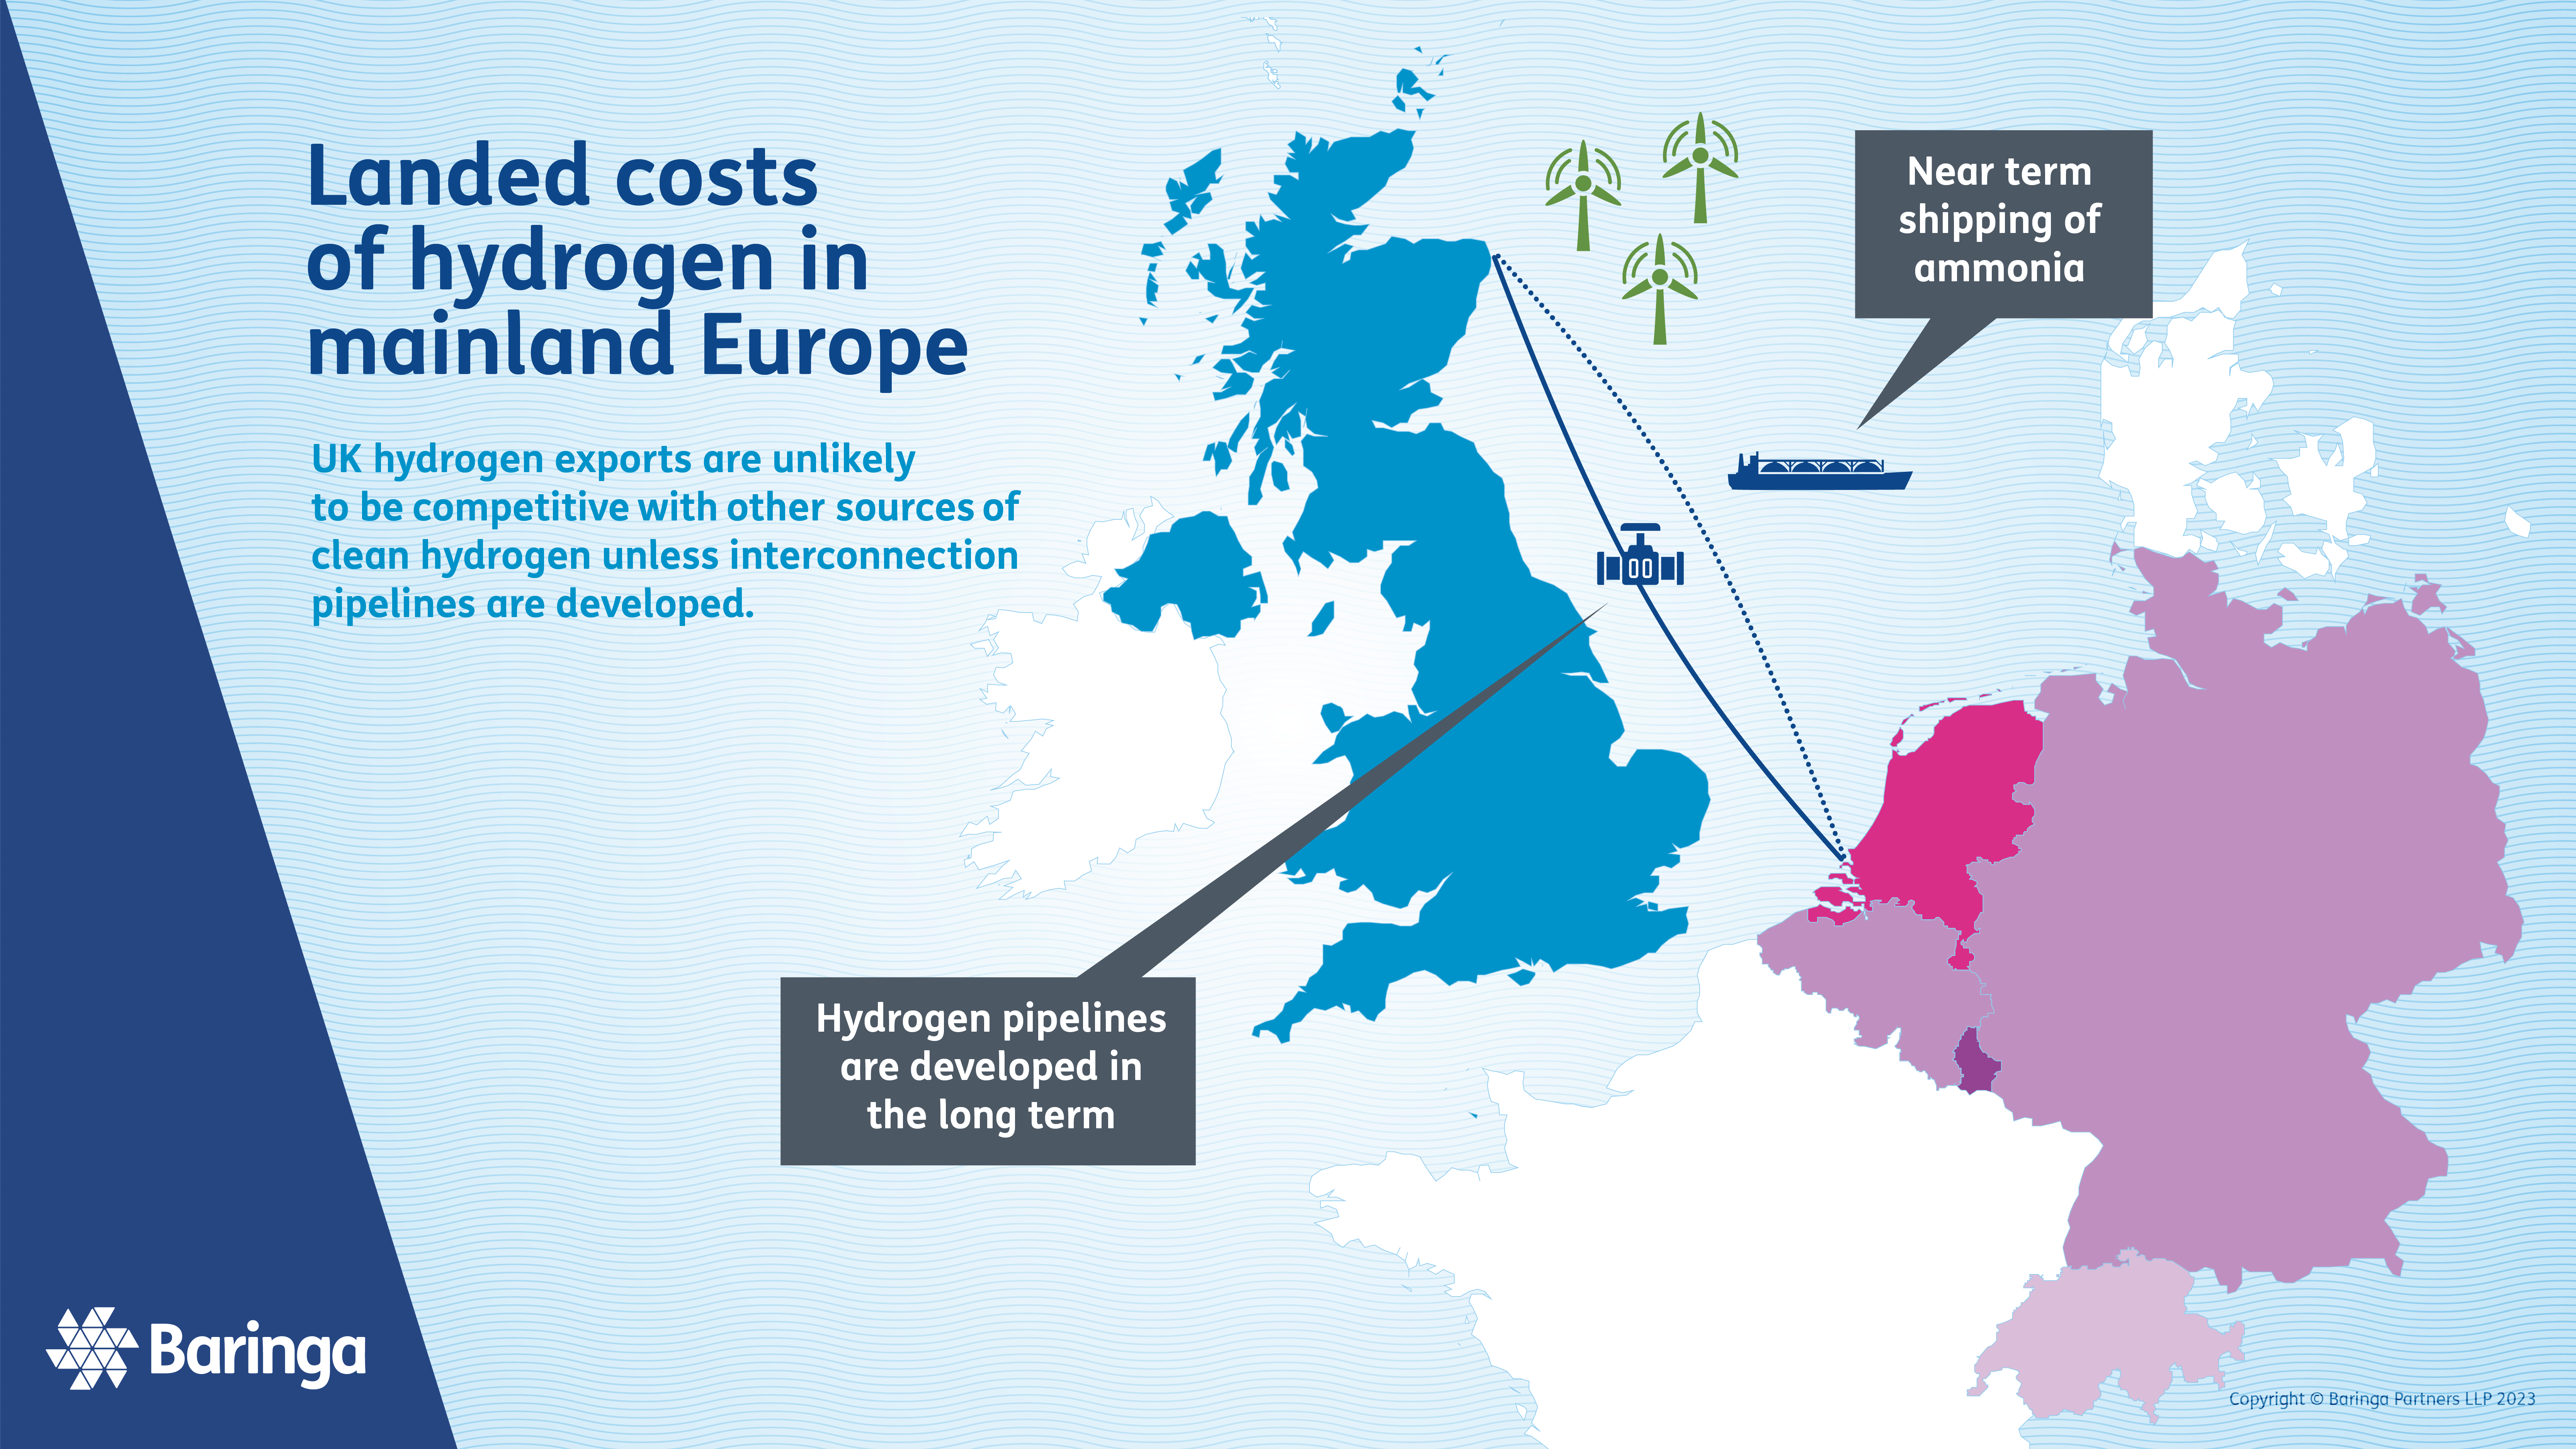 Landed costs in hydrogen in mainland Europe